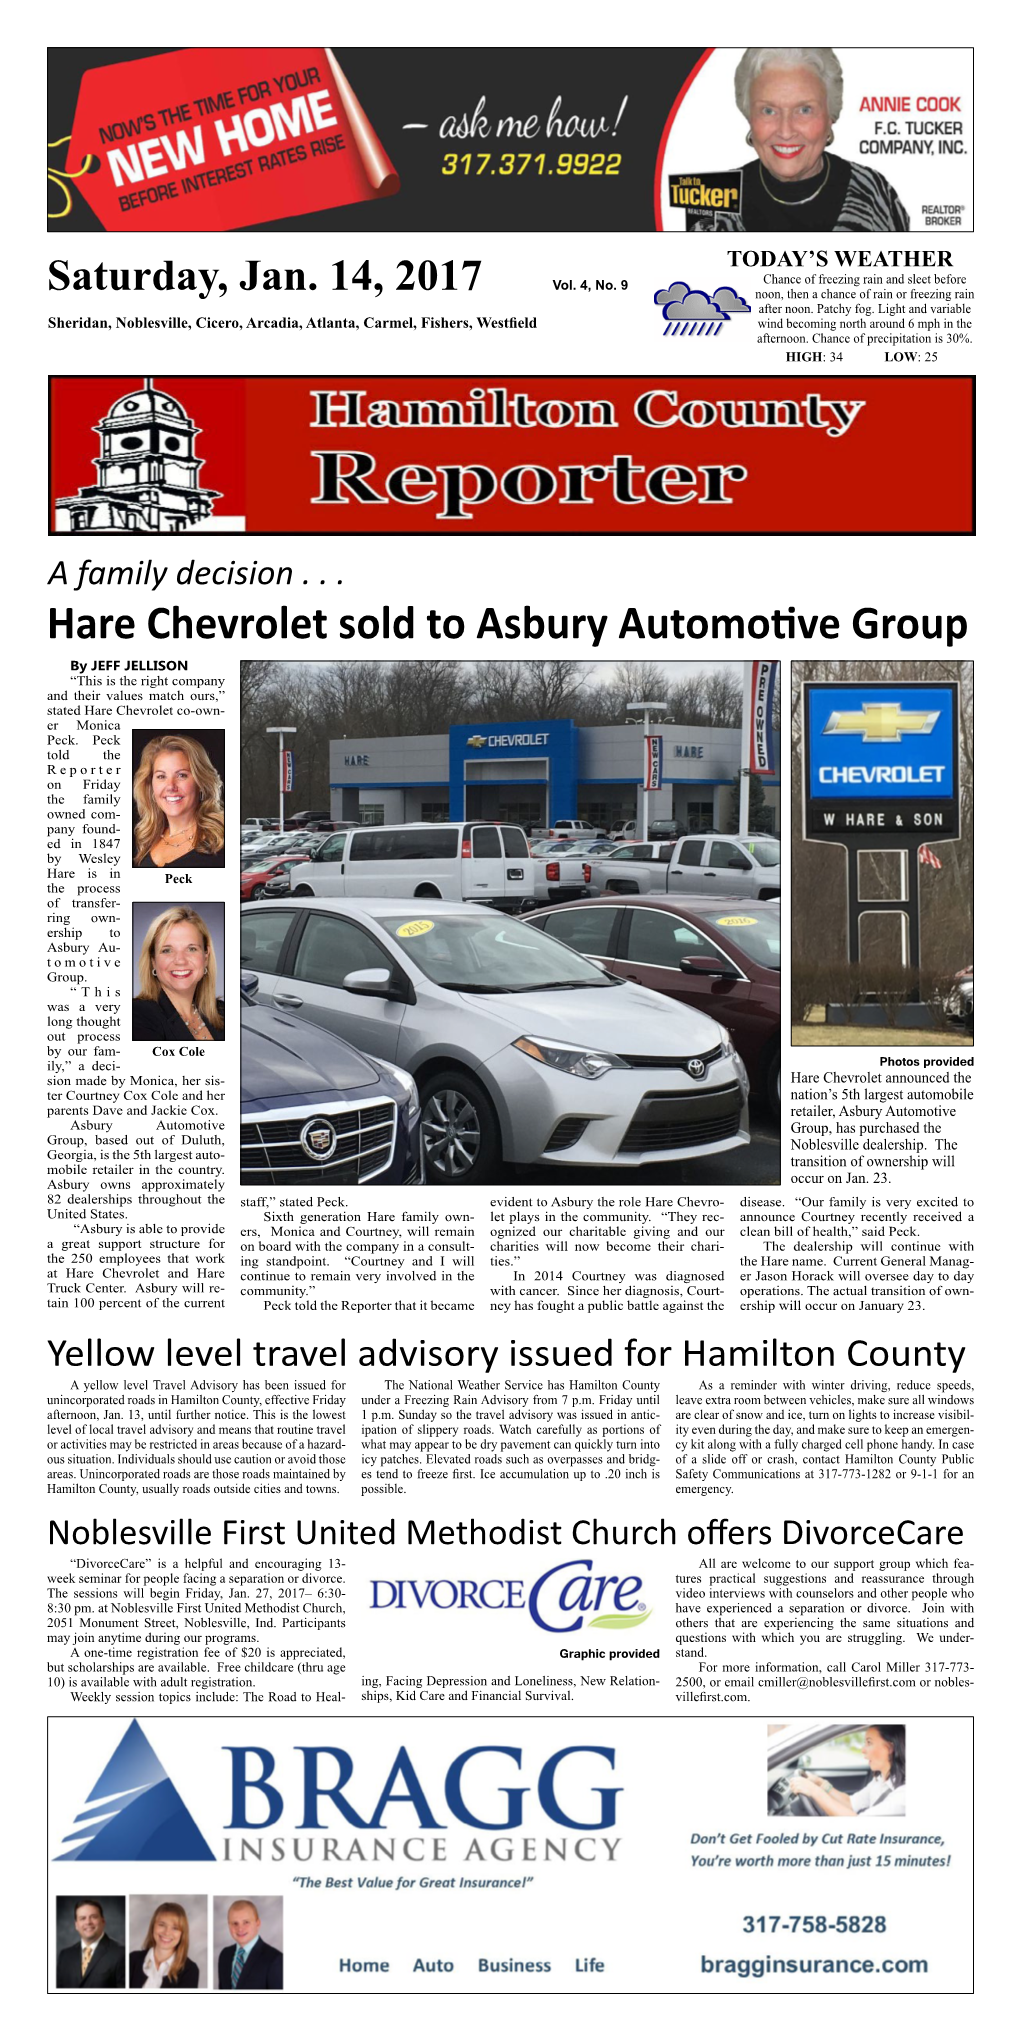 Hare Chevrolet Sold to Asbury Automotive Group by JEFF JELLISON “This Is the Right Company and Their Values Match Ours,” Stated Hare Chevrolet Co-Own- Er Monica Peck